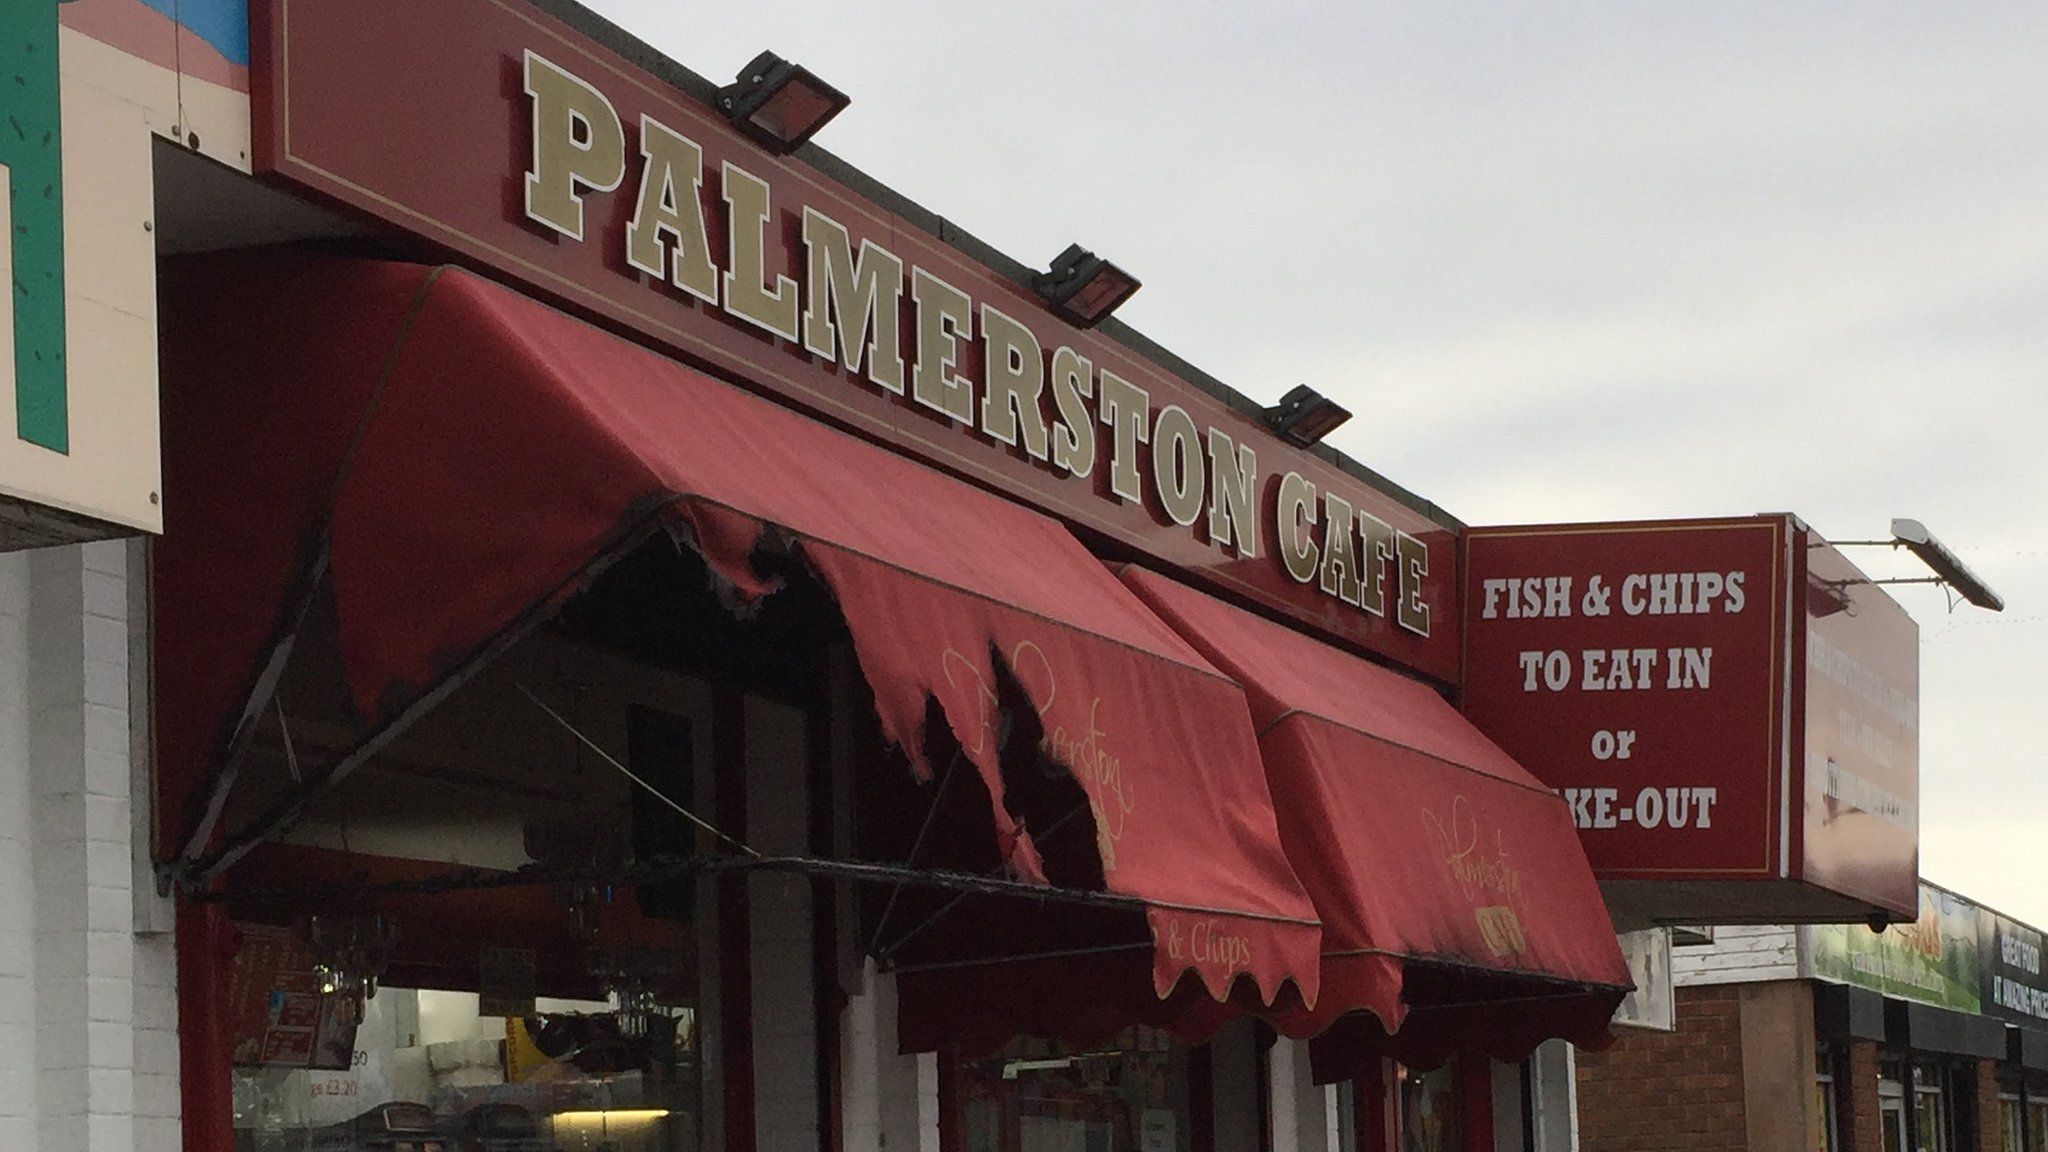 Palmerston Cafe sign